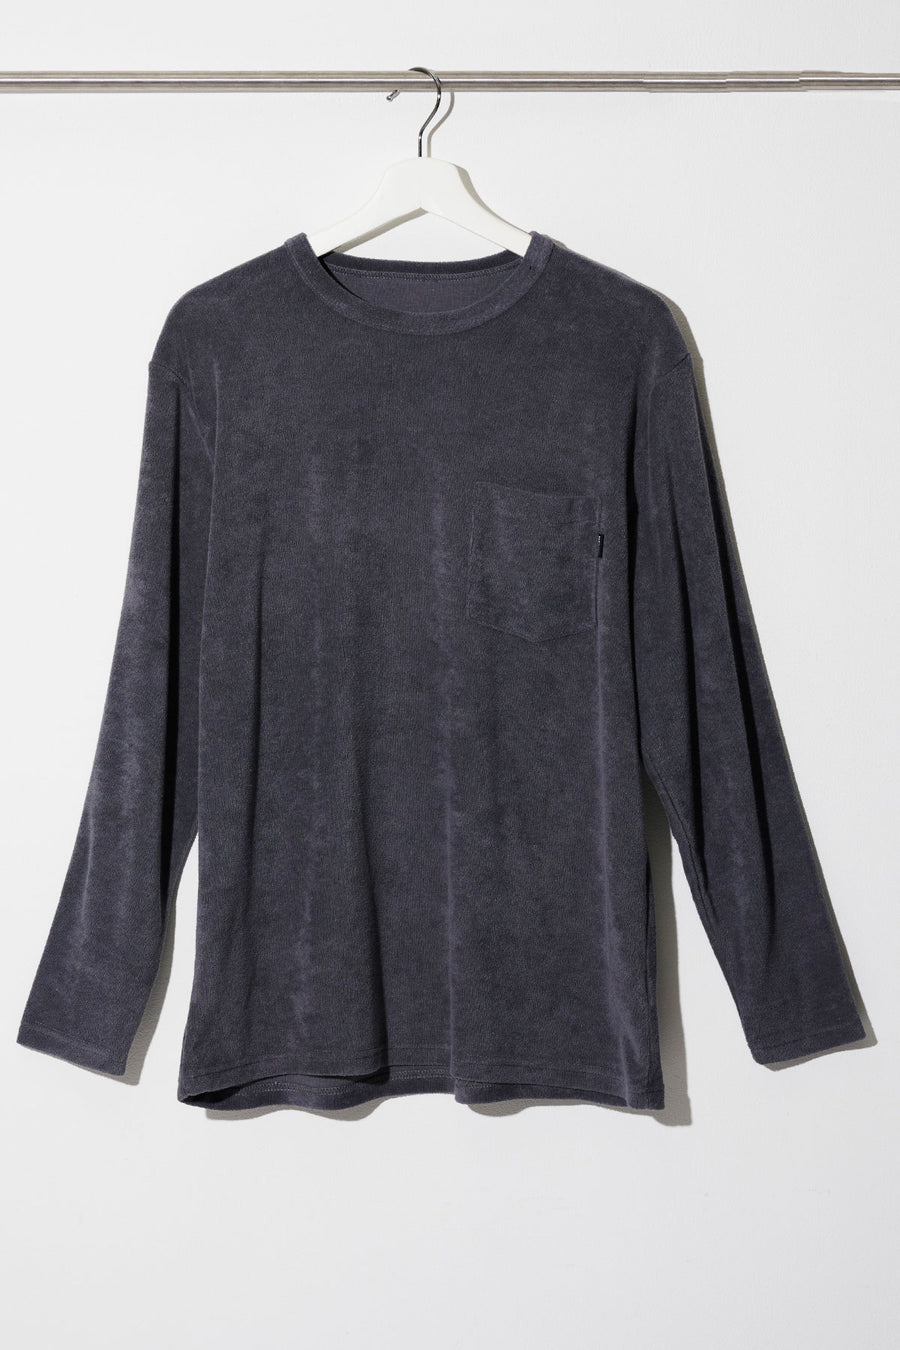 Relux LONG T-SHIRT（Pile）Chacoal Gray [New ITEM]